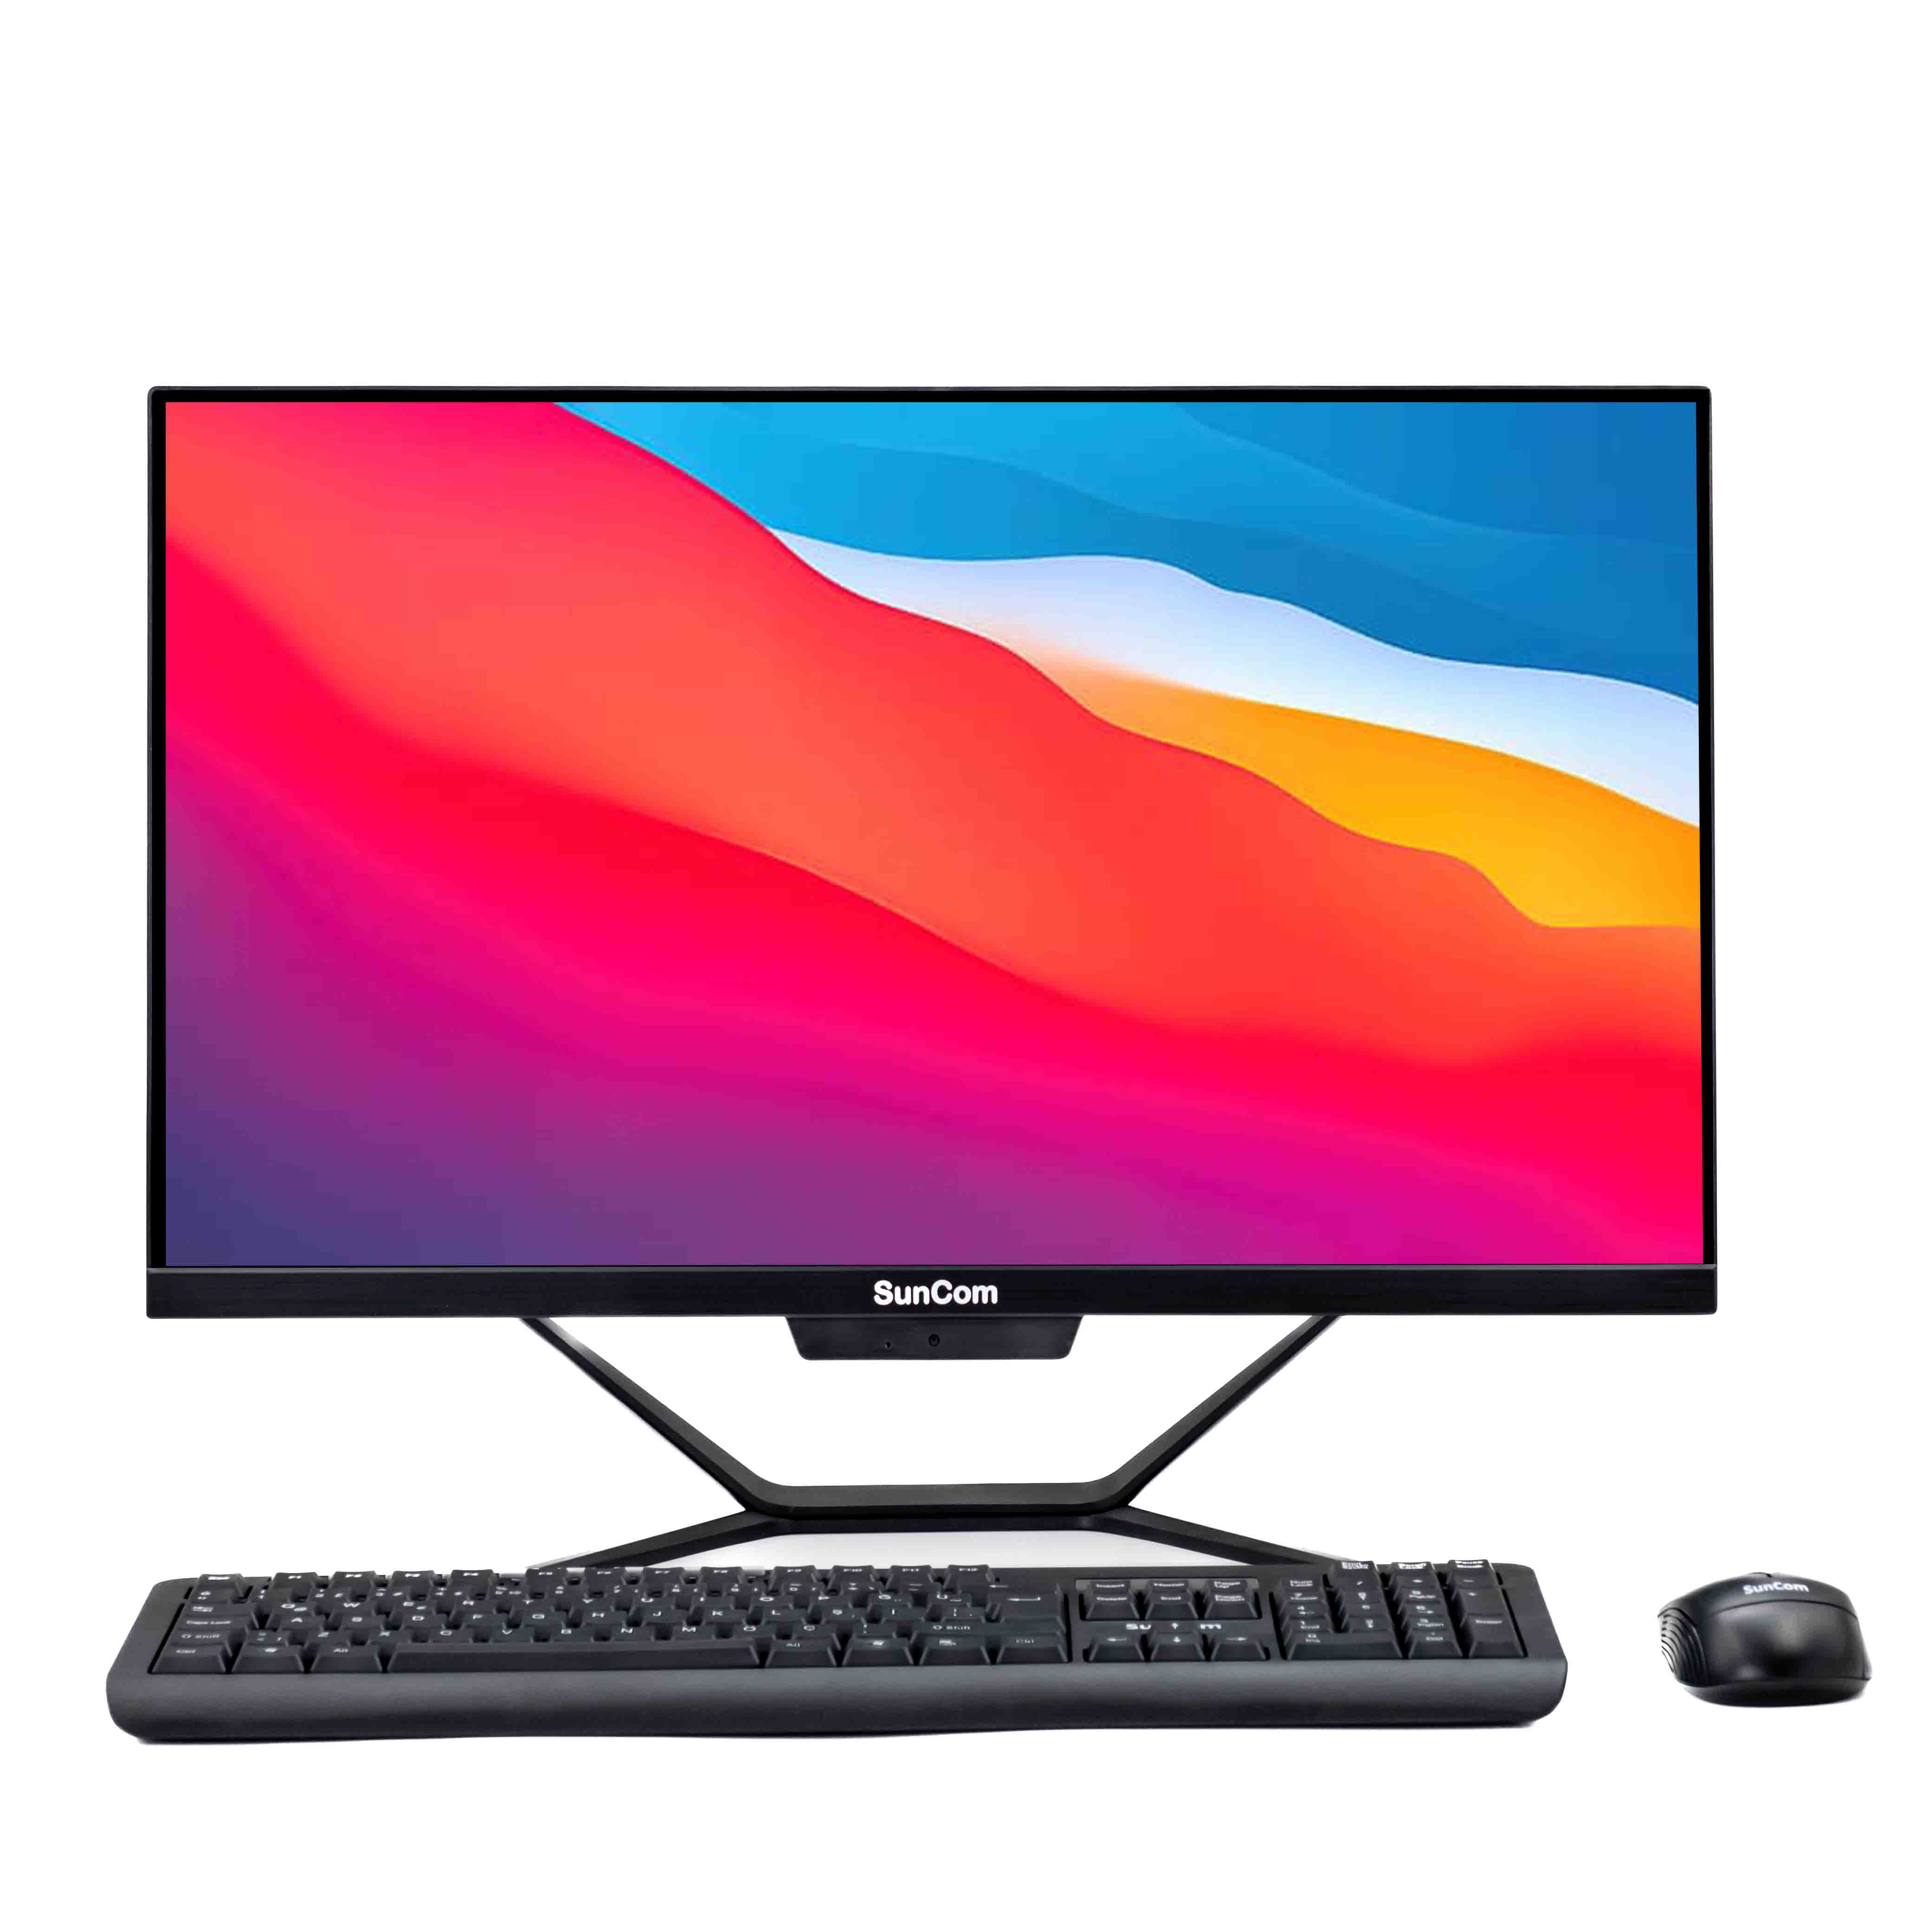 SUNCOM PANACEA SCA-565085M23 I5-6500T 8GB 512 SSD 23.8" FHD IPS NONTOUCH FREE-DOS SIYAH ALL IN ONE PC